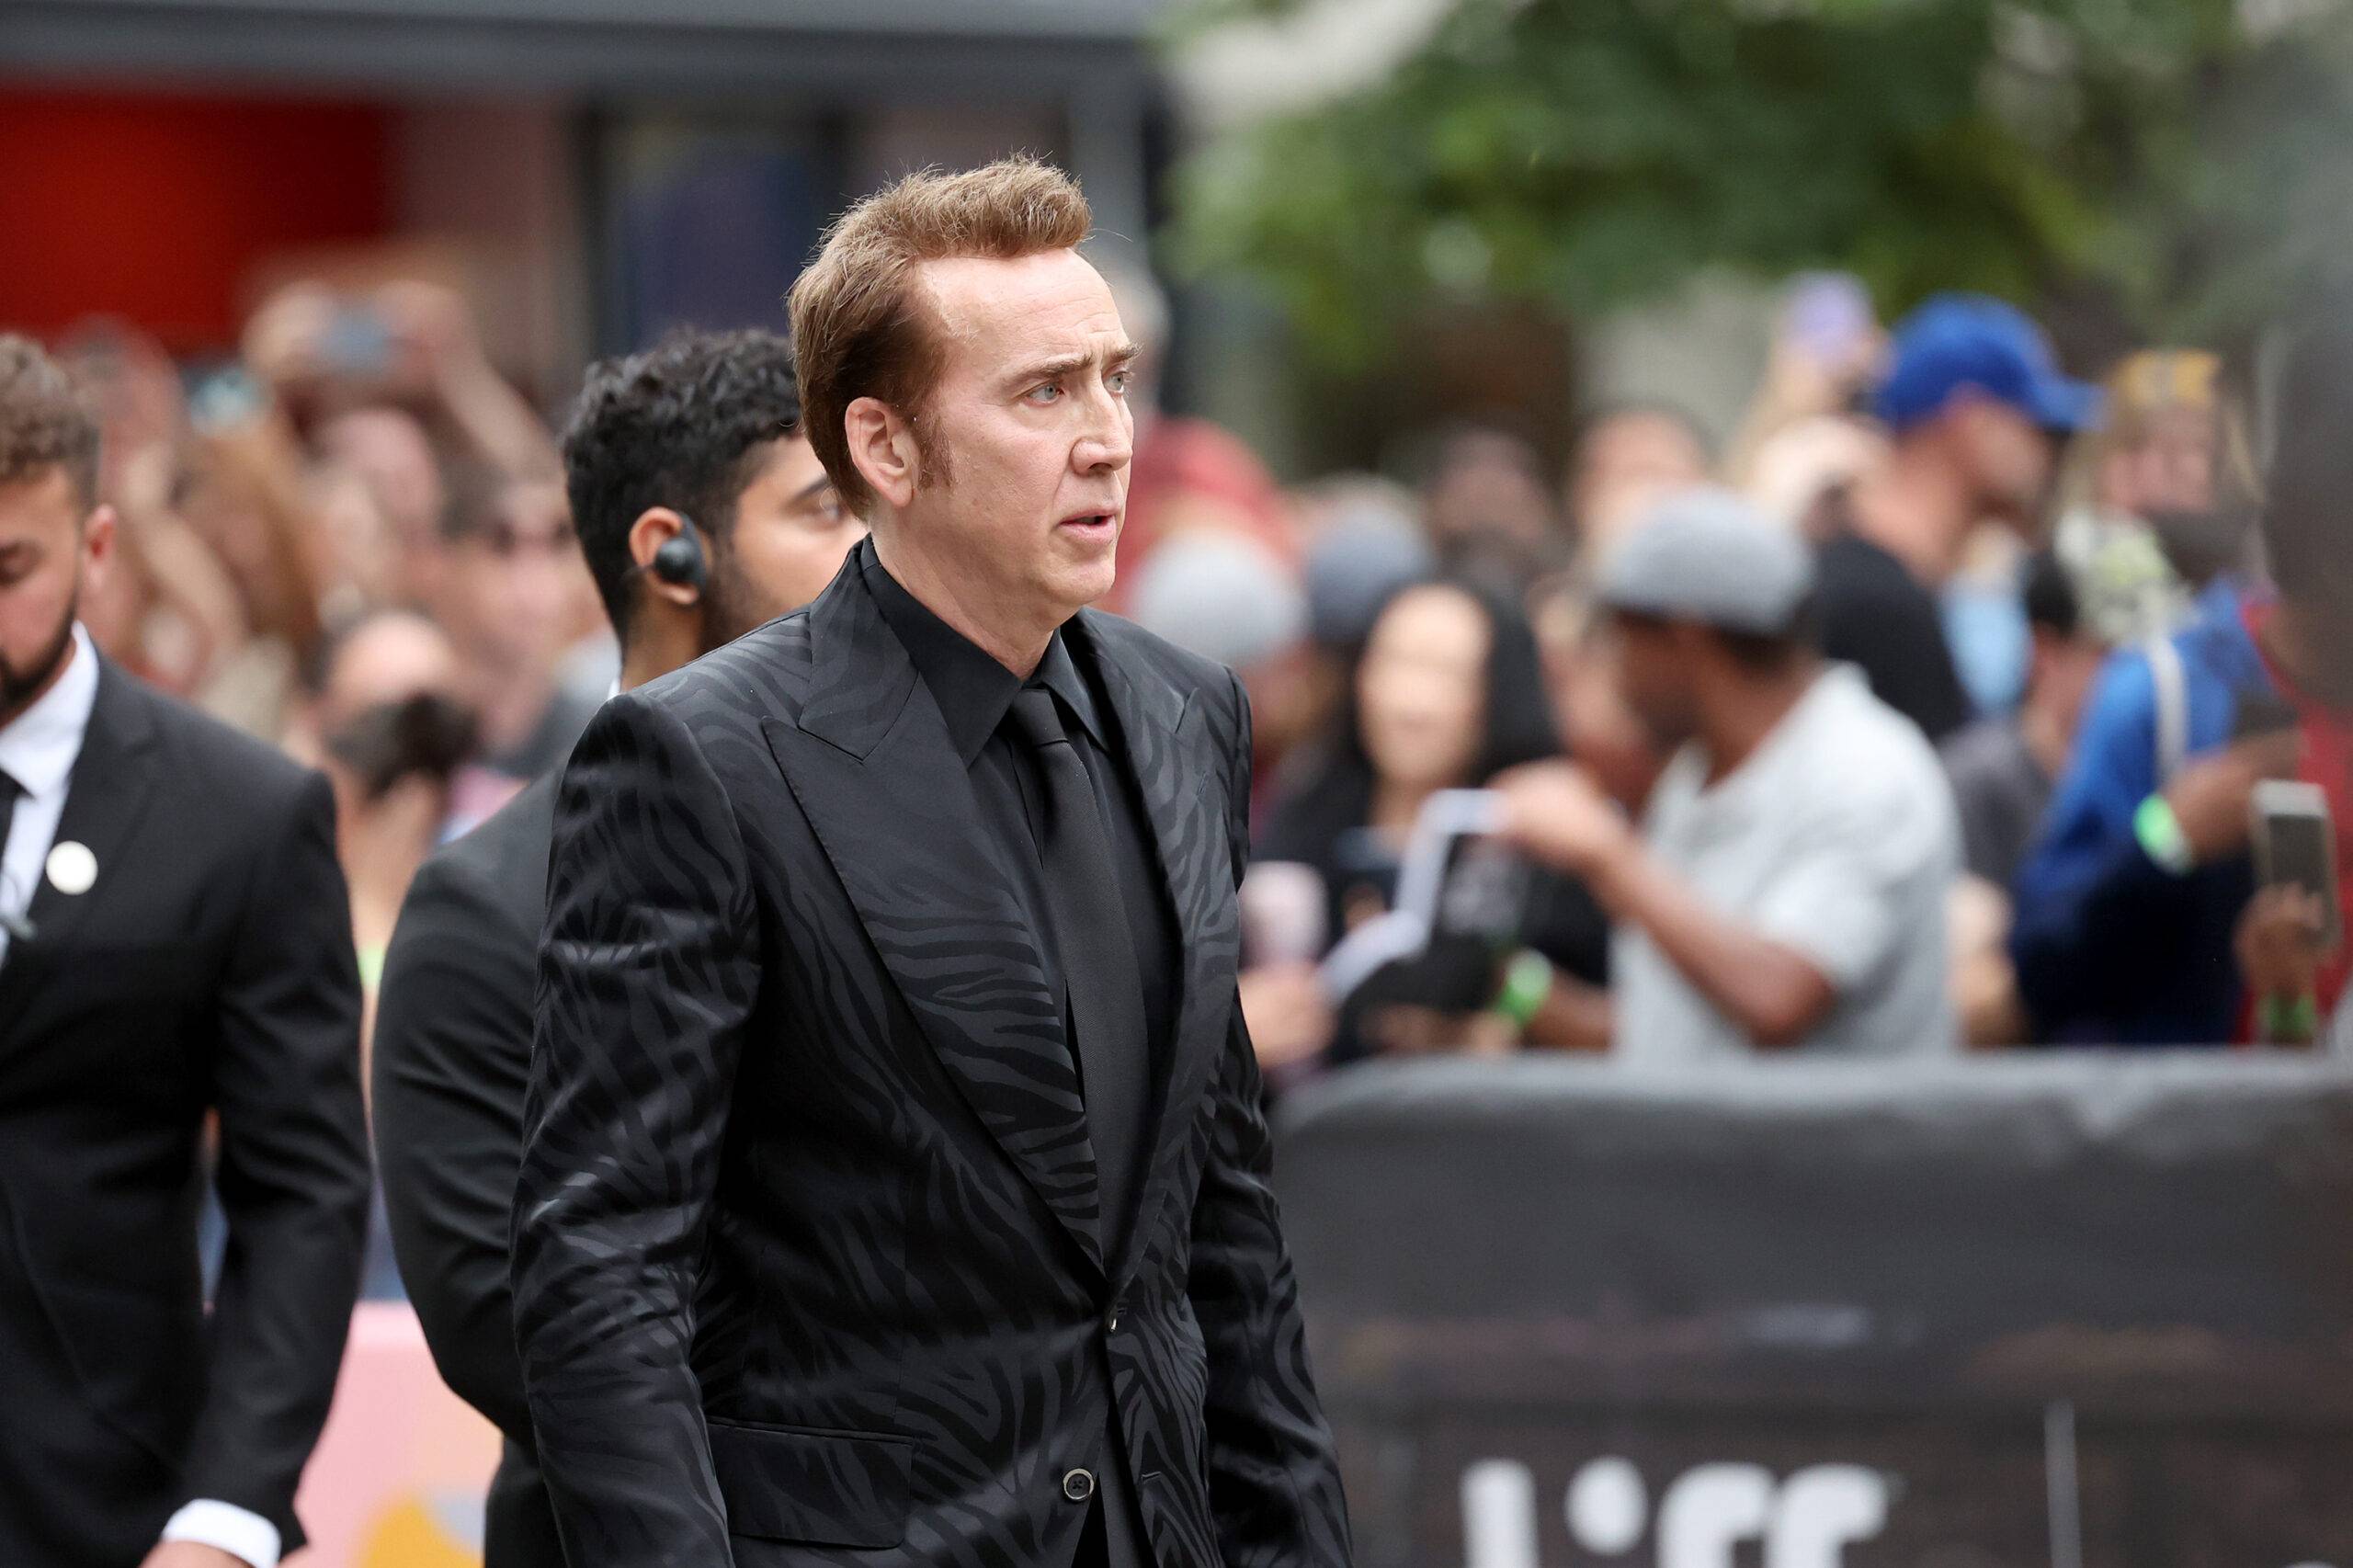 Nicolas Cage attends the "Dream Scenario" premiere during the 2023 Toronto International Film Festival at Royal Alexandra Theatre on September 09, 2023 in Toronto, Ontario [Robin L Marshall/Getty Images]